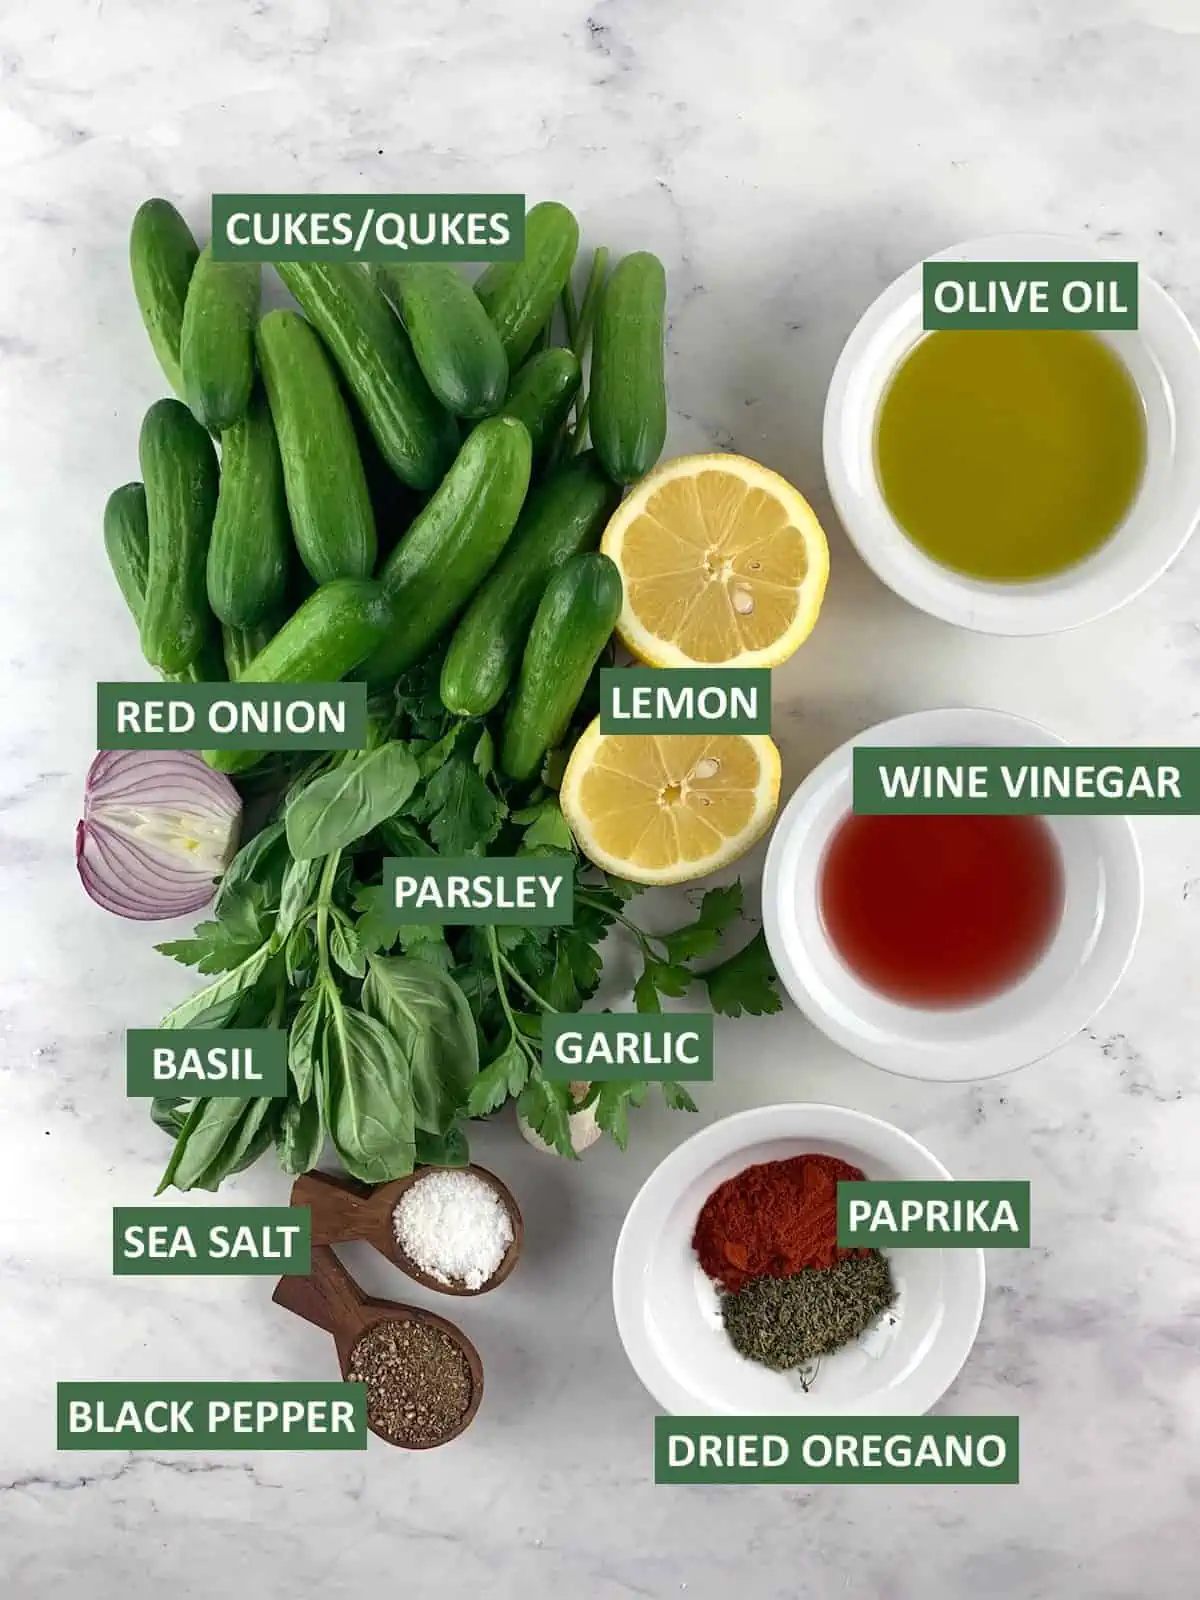 INGREDIENTS NEEDED TO MAKE ITALIAN CUCUMBER SALAD WITH TEXT